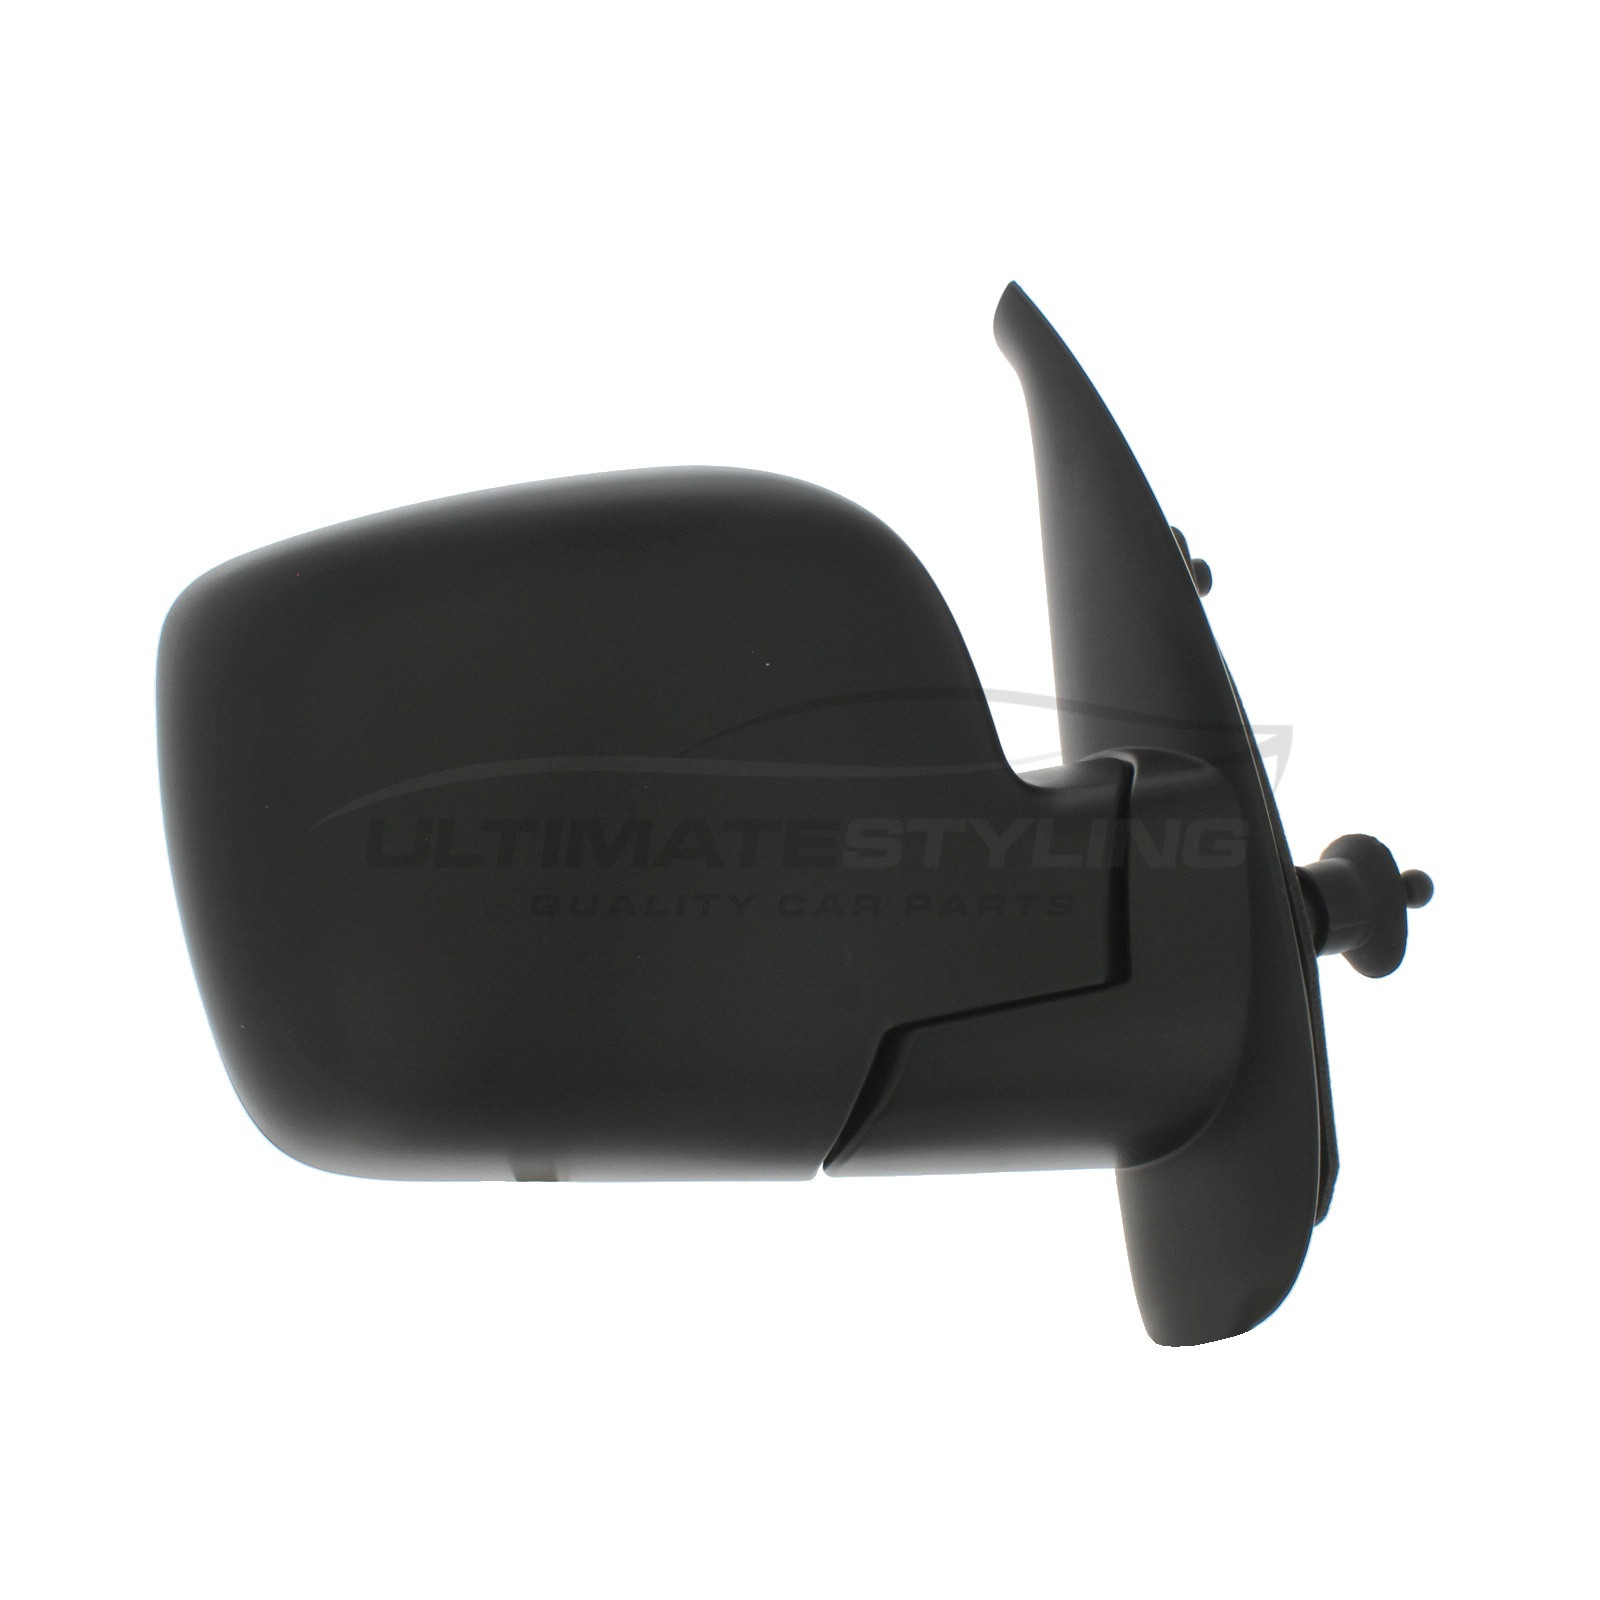 Renault Kangoo Wing Mirror / Door Mirror - Drivers Side (RH) - Cable adjustment - Non-Heated Glass - Black